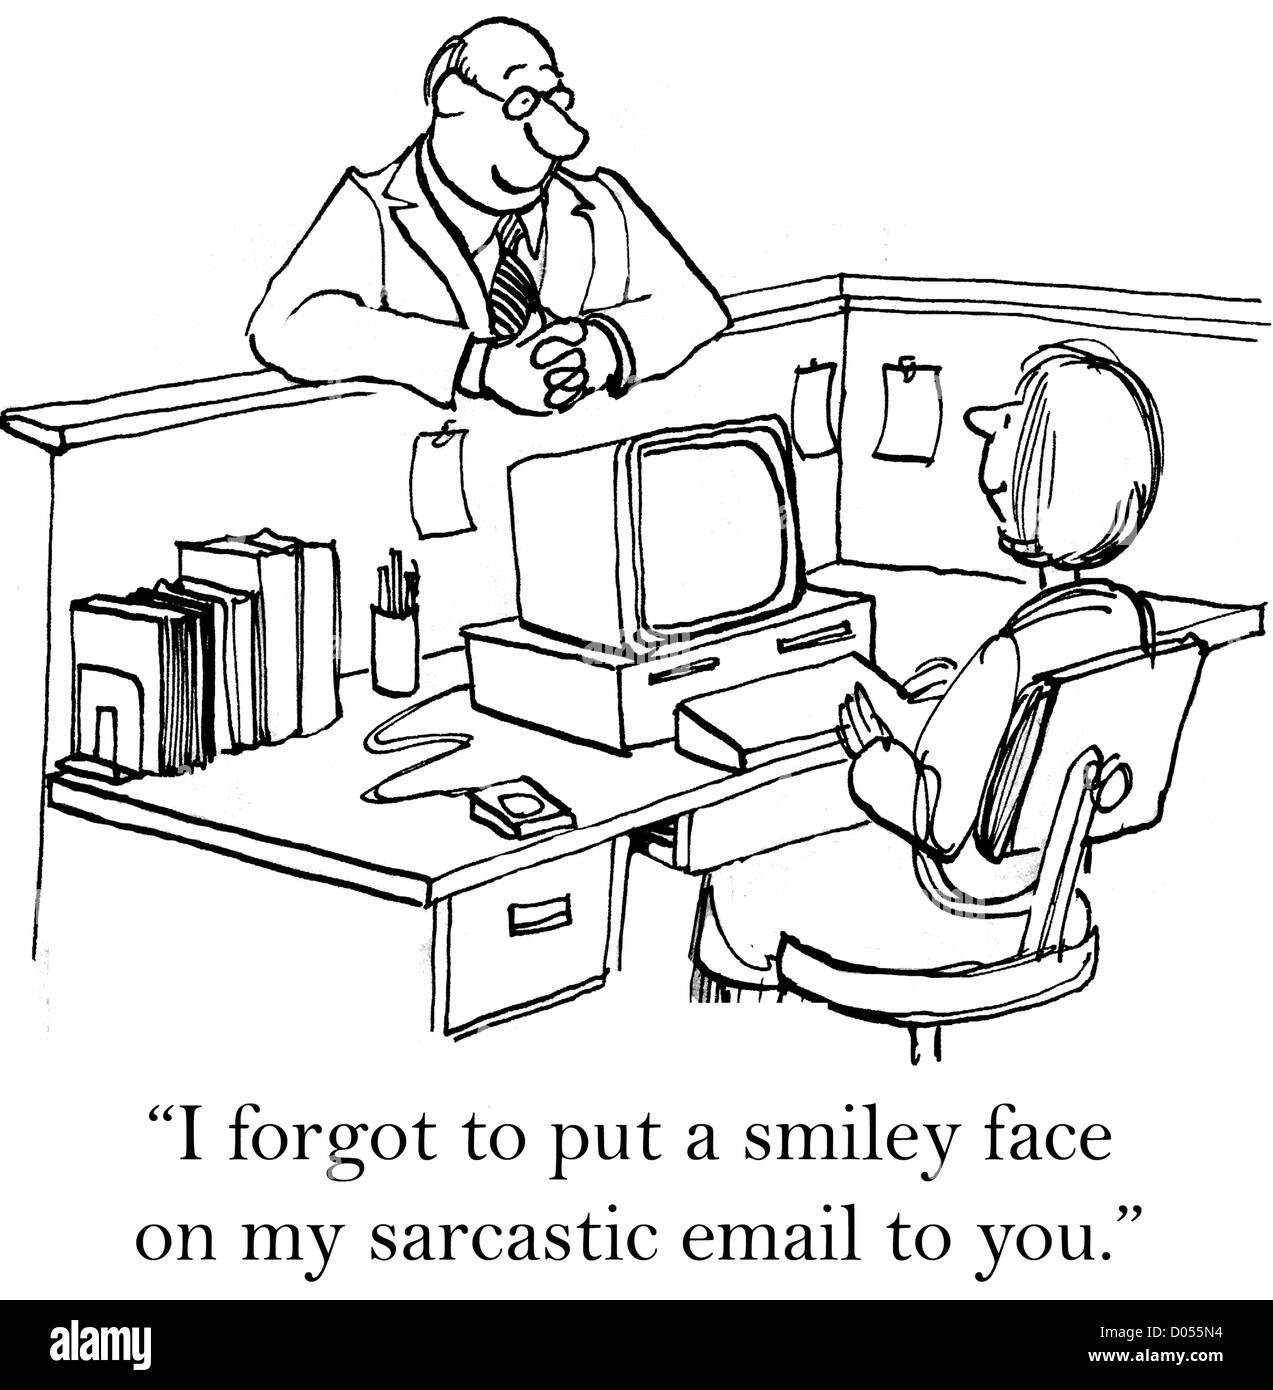 'I forgot to put a smiley face on my sarcastic email to you.' Stock Photo